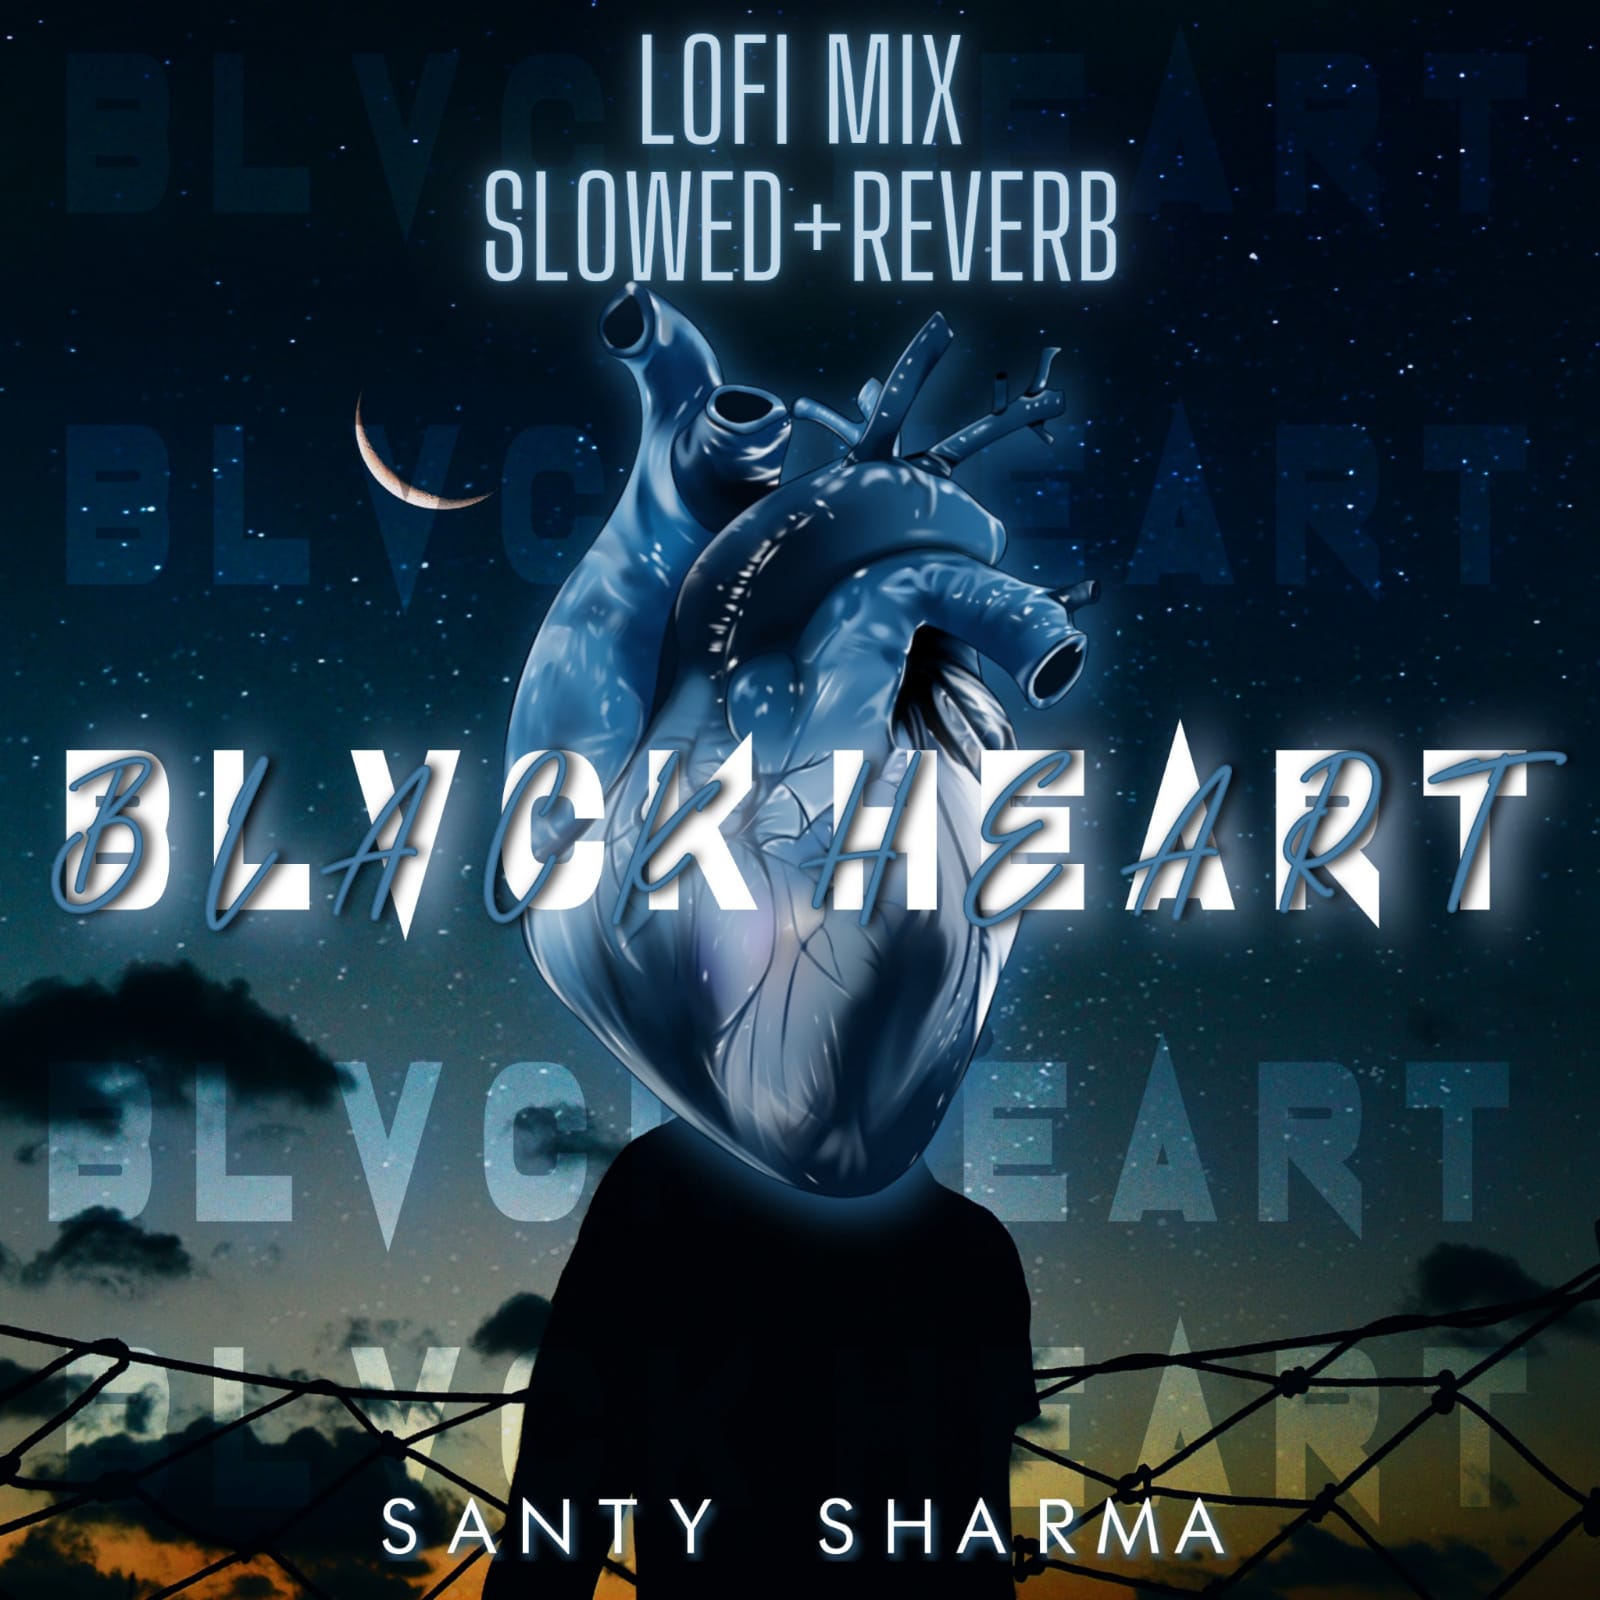 Santy Sharma launched his new single Black Heart with Lo-Fi Mix